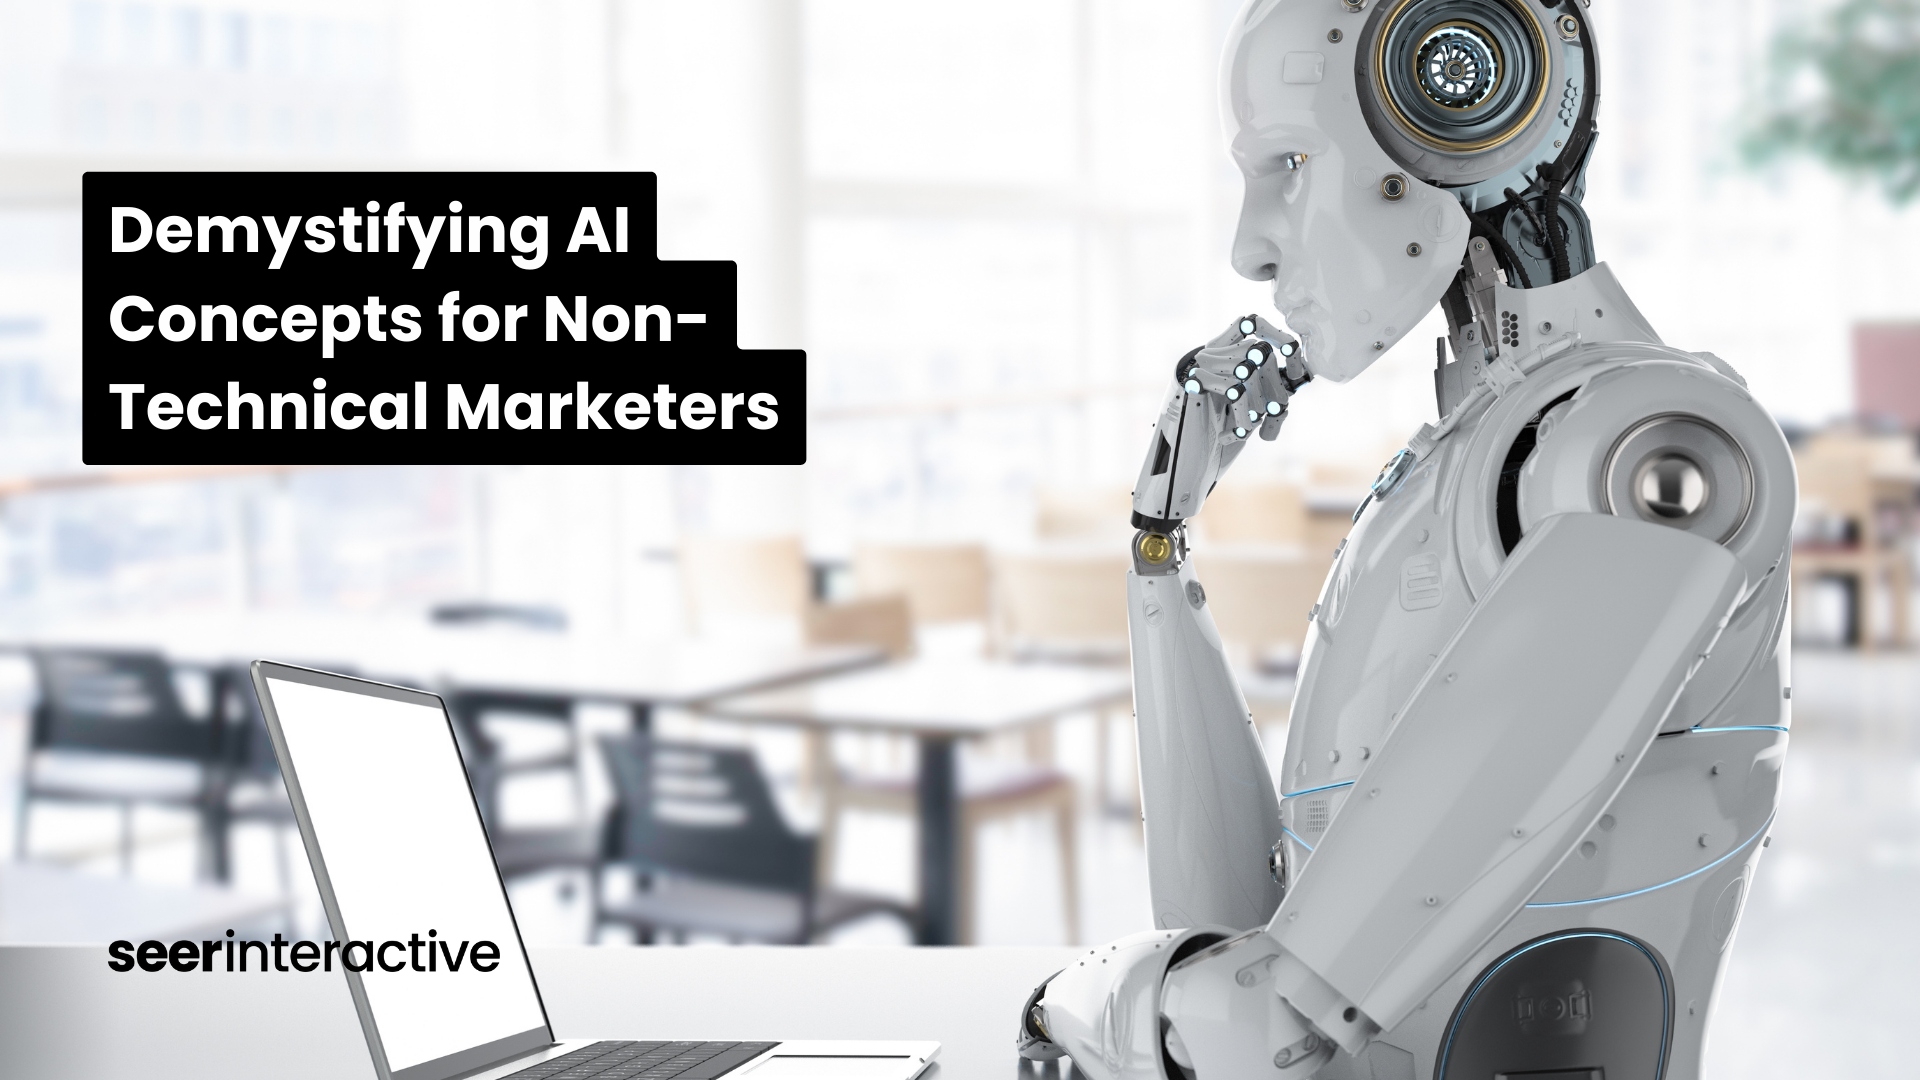 Demystifying AI Concepts for Non-Technical Marketers